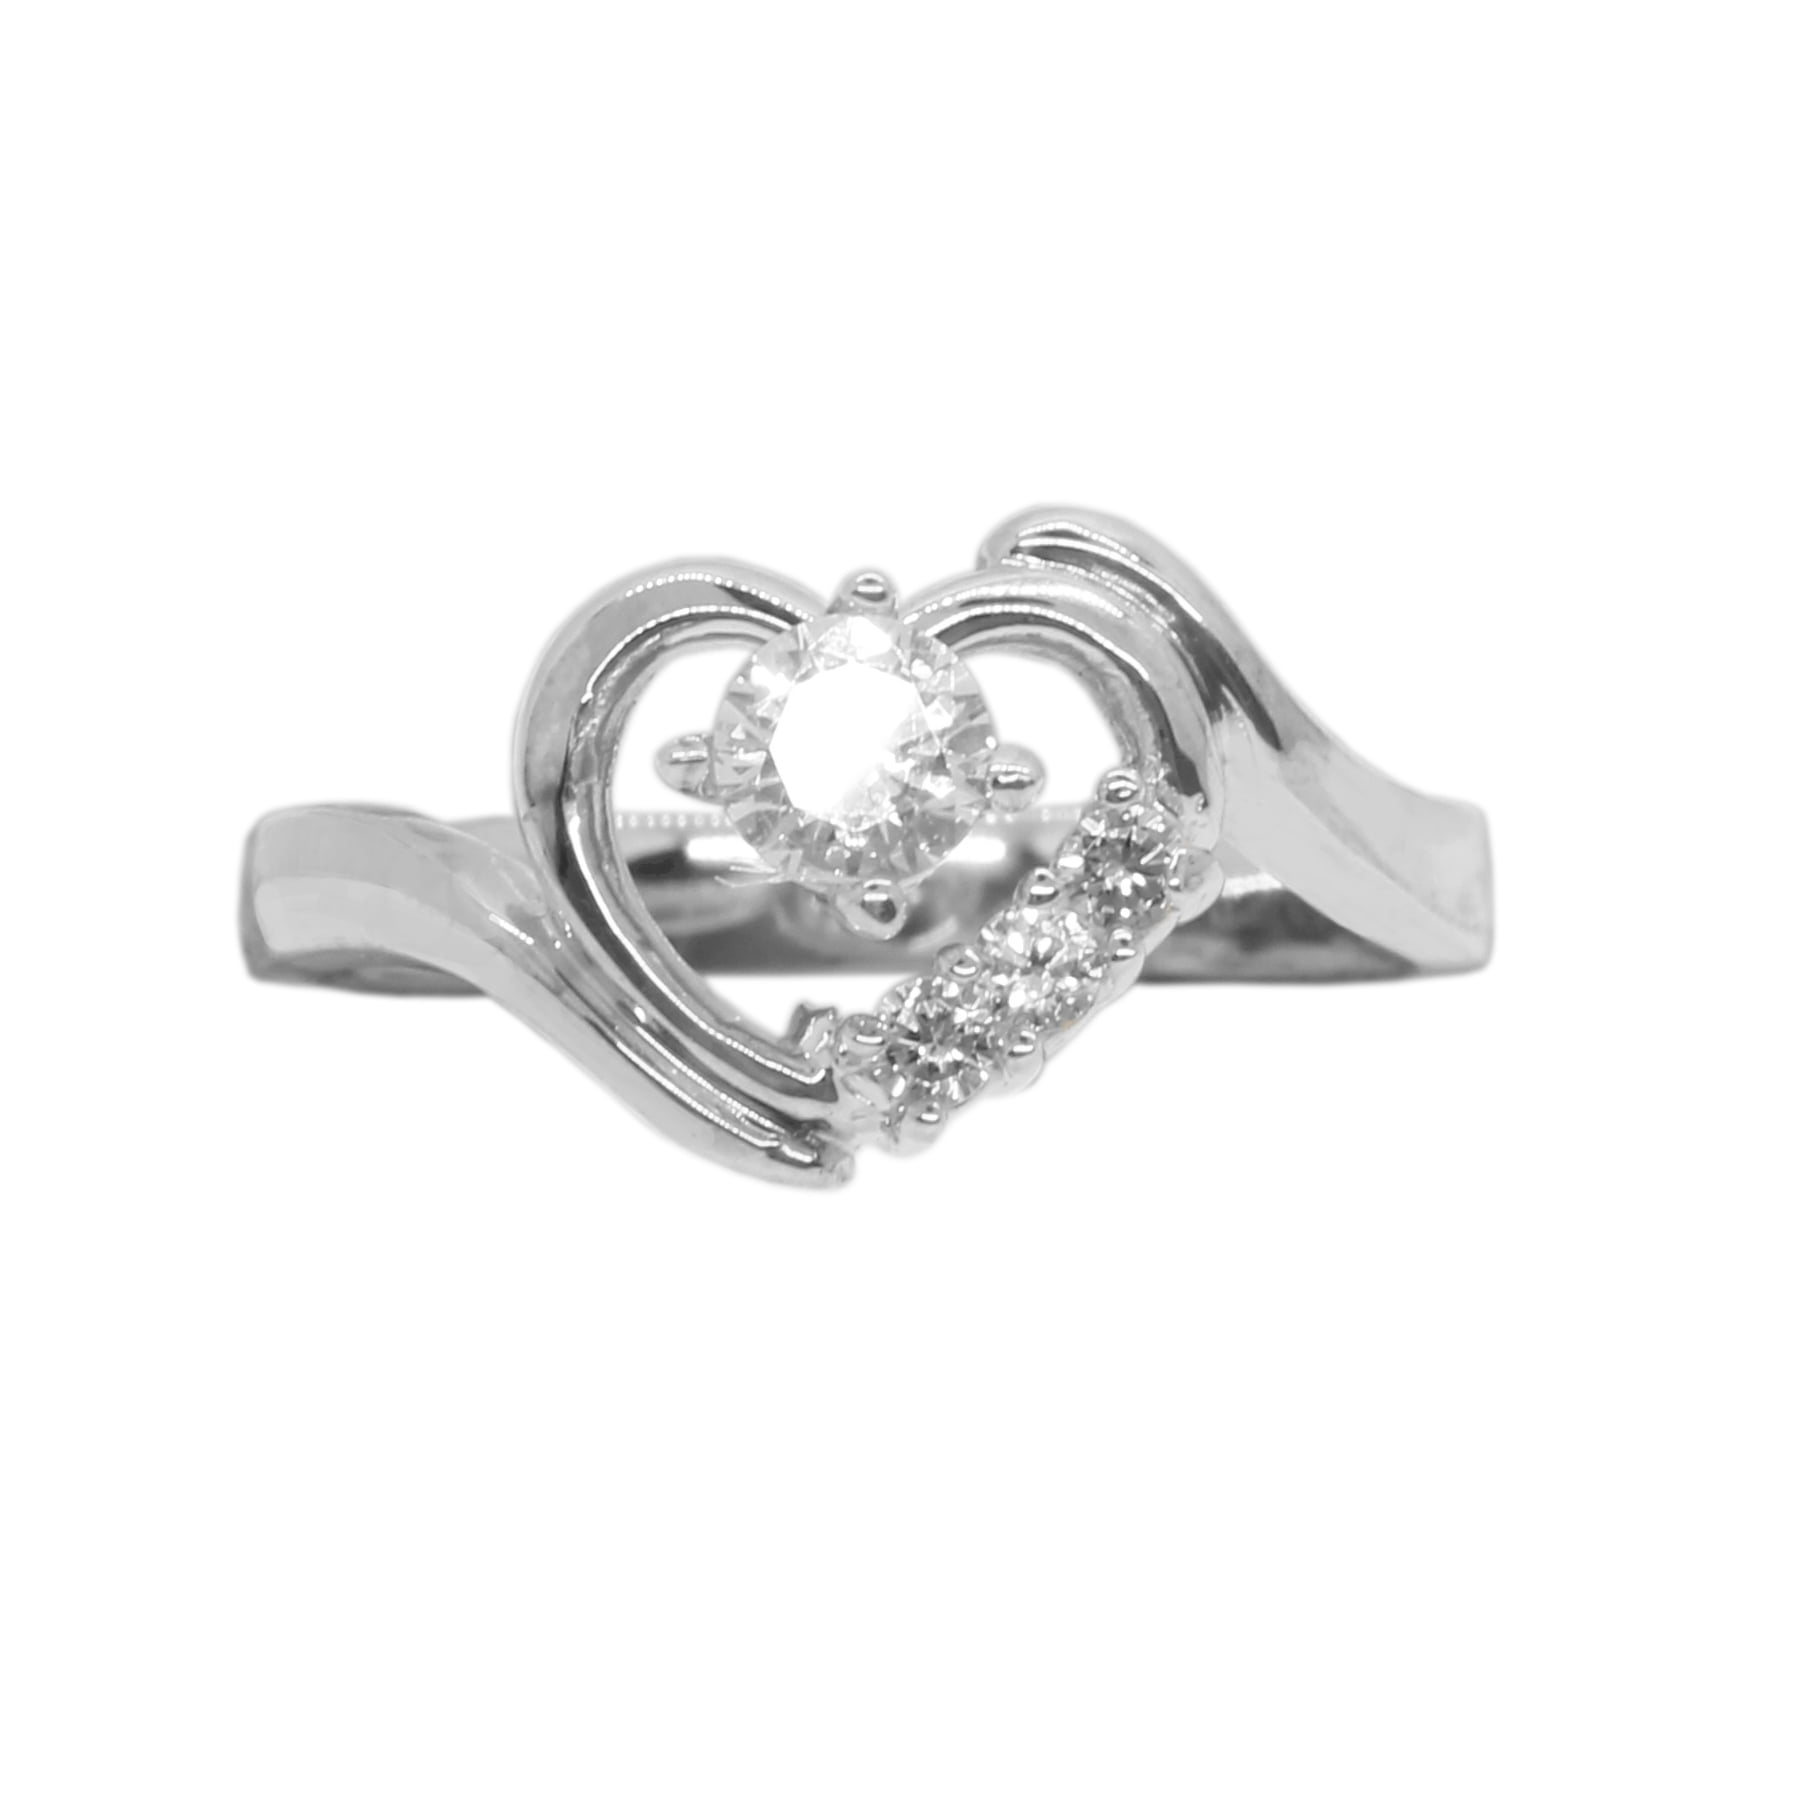 7MM Round Solitaire Cubic Zirconia .925 Sterling Silver Ring Sizes 8 Details about   Sale 